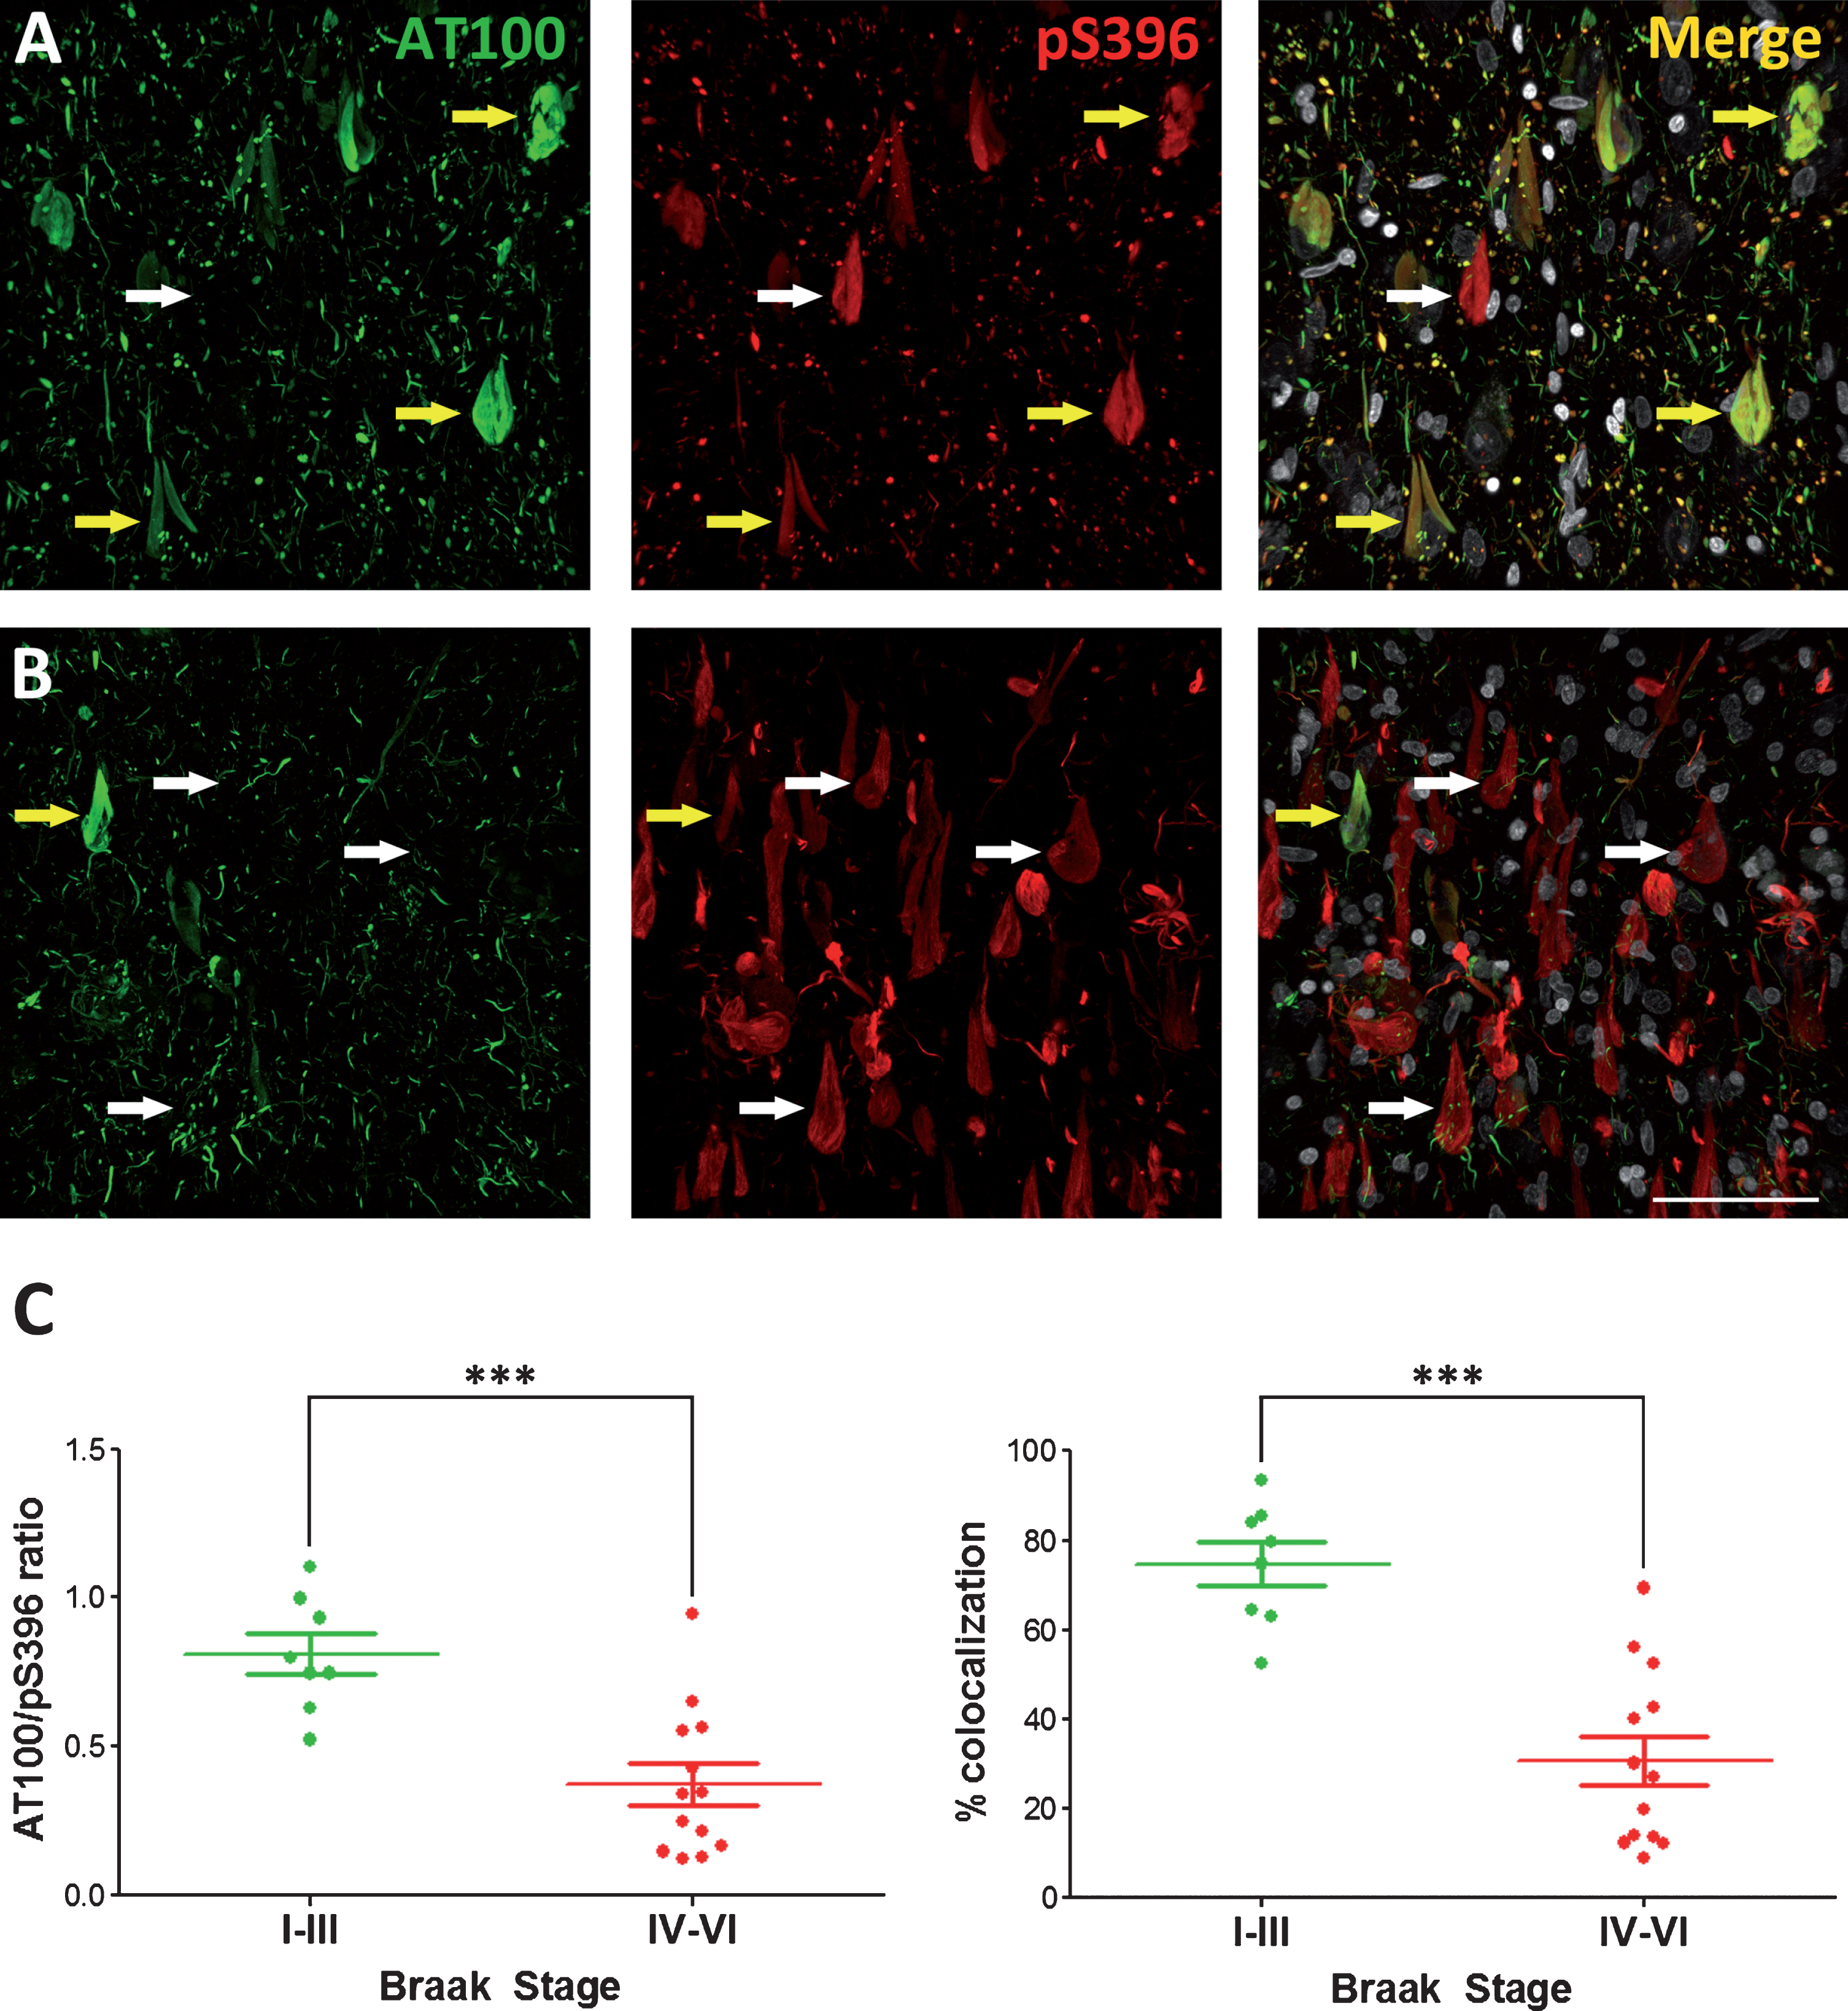 Representative photomicrographs showing the pattern of both AT100 and pS396 immunostaining in cases with low (I−III) (A) or high (V−VI) (B) Braak Stages. White arrows mark examples of neurons presenting no colocalization, whereas yellow arrows mark double-labeled neurons. (C) Histograms show the AT100/pS396 labeling ratio (left) or the colocalization percentage (right) in all the cases examined in this study grouped by low or high Braak Stage. A paired t test found significant differences in the comparisons between low and high Braak stages for both AT100/S396 ratio and colocalization (mean ± SD). ***p < 0.0005. Scale bar: 60 μm.